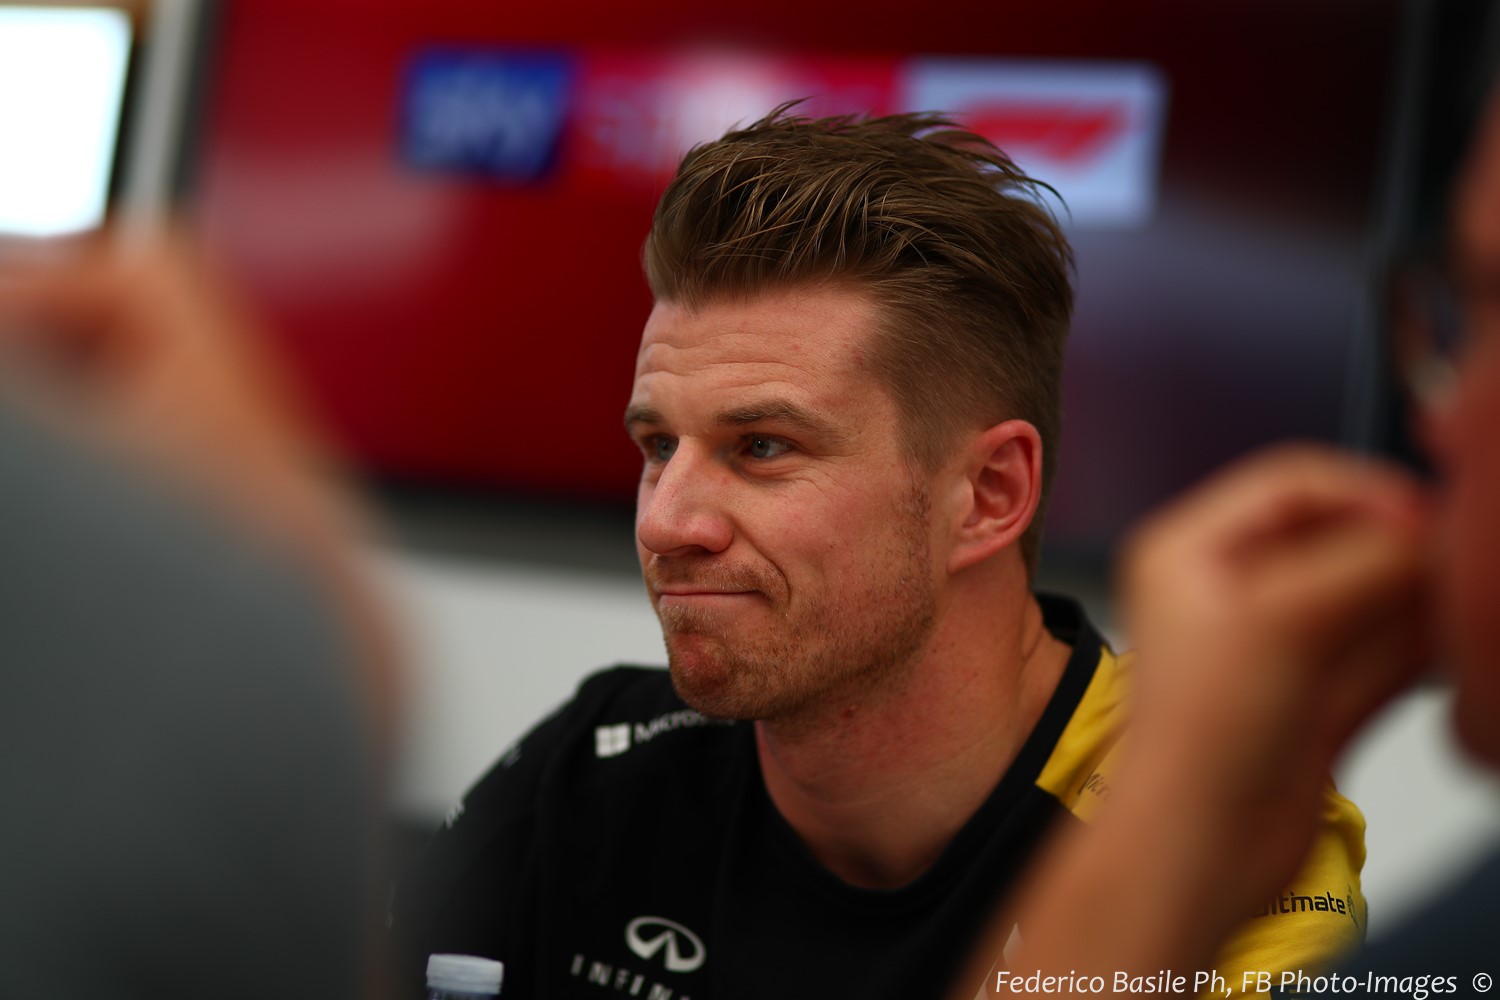 Hulkenberg. AR1 Note: He has never even had an F1 podium in all these years